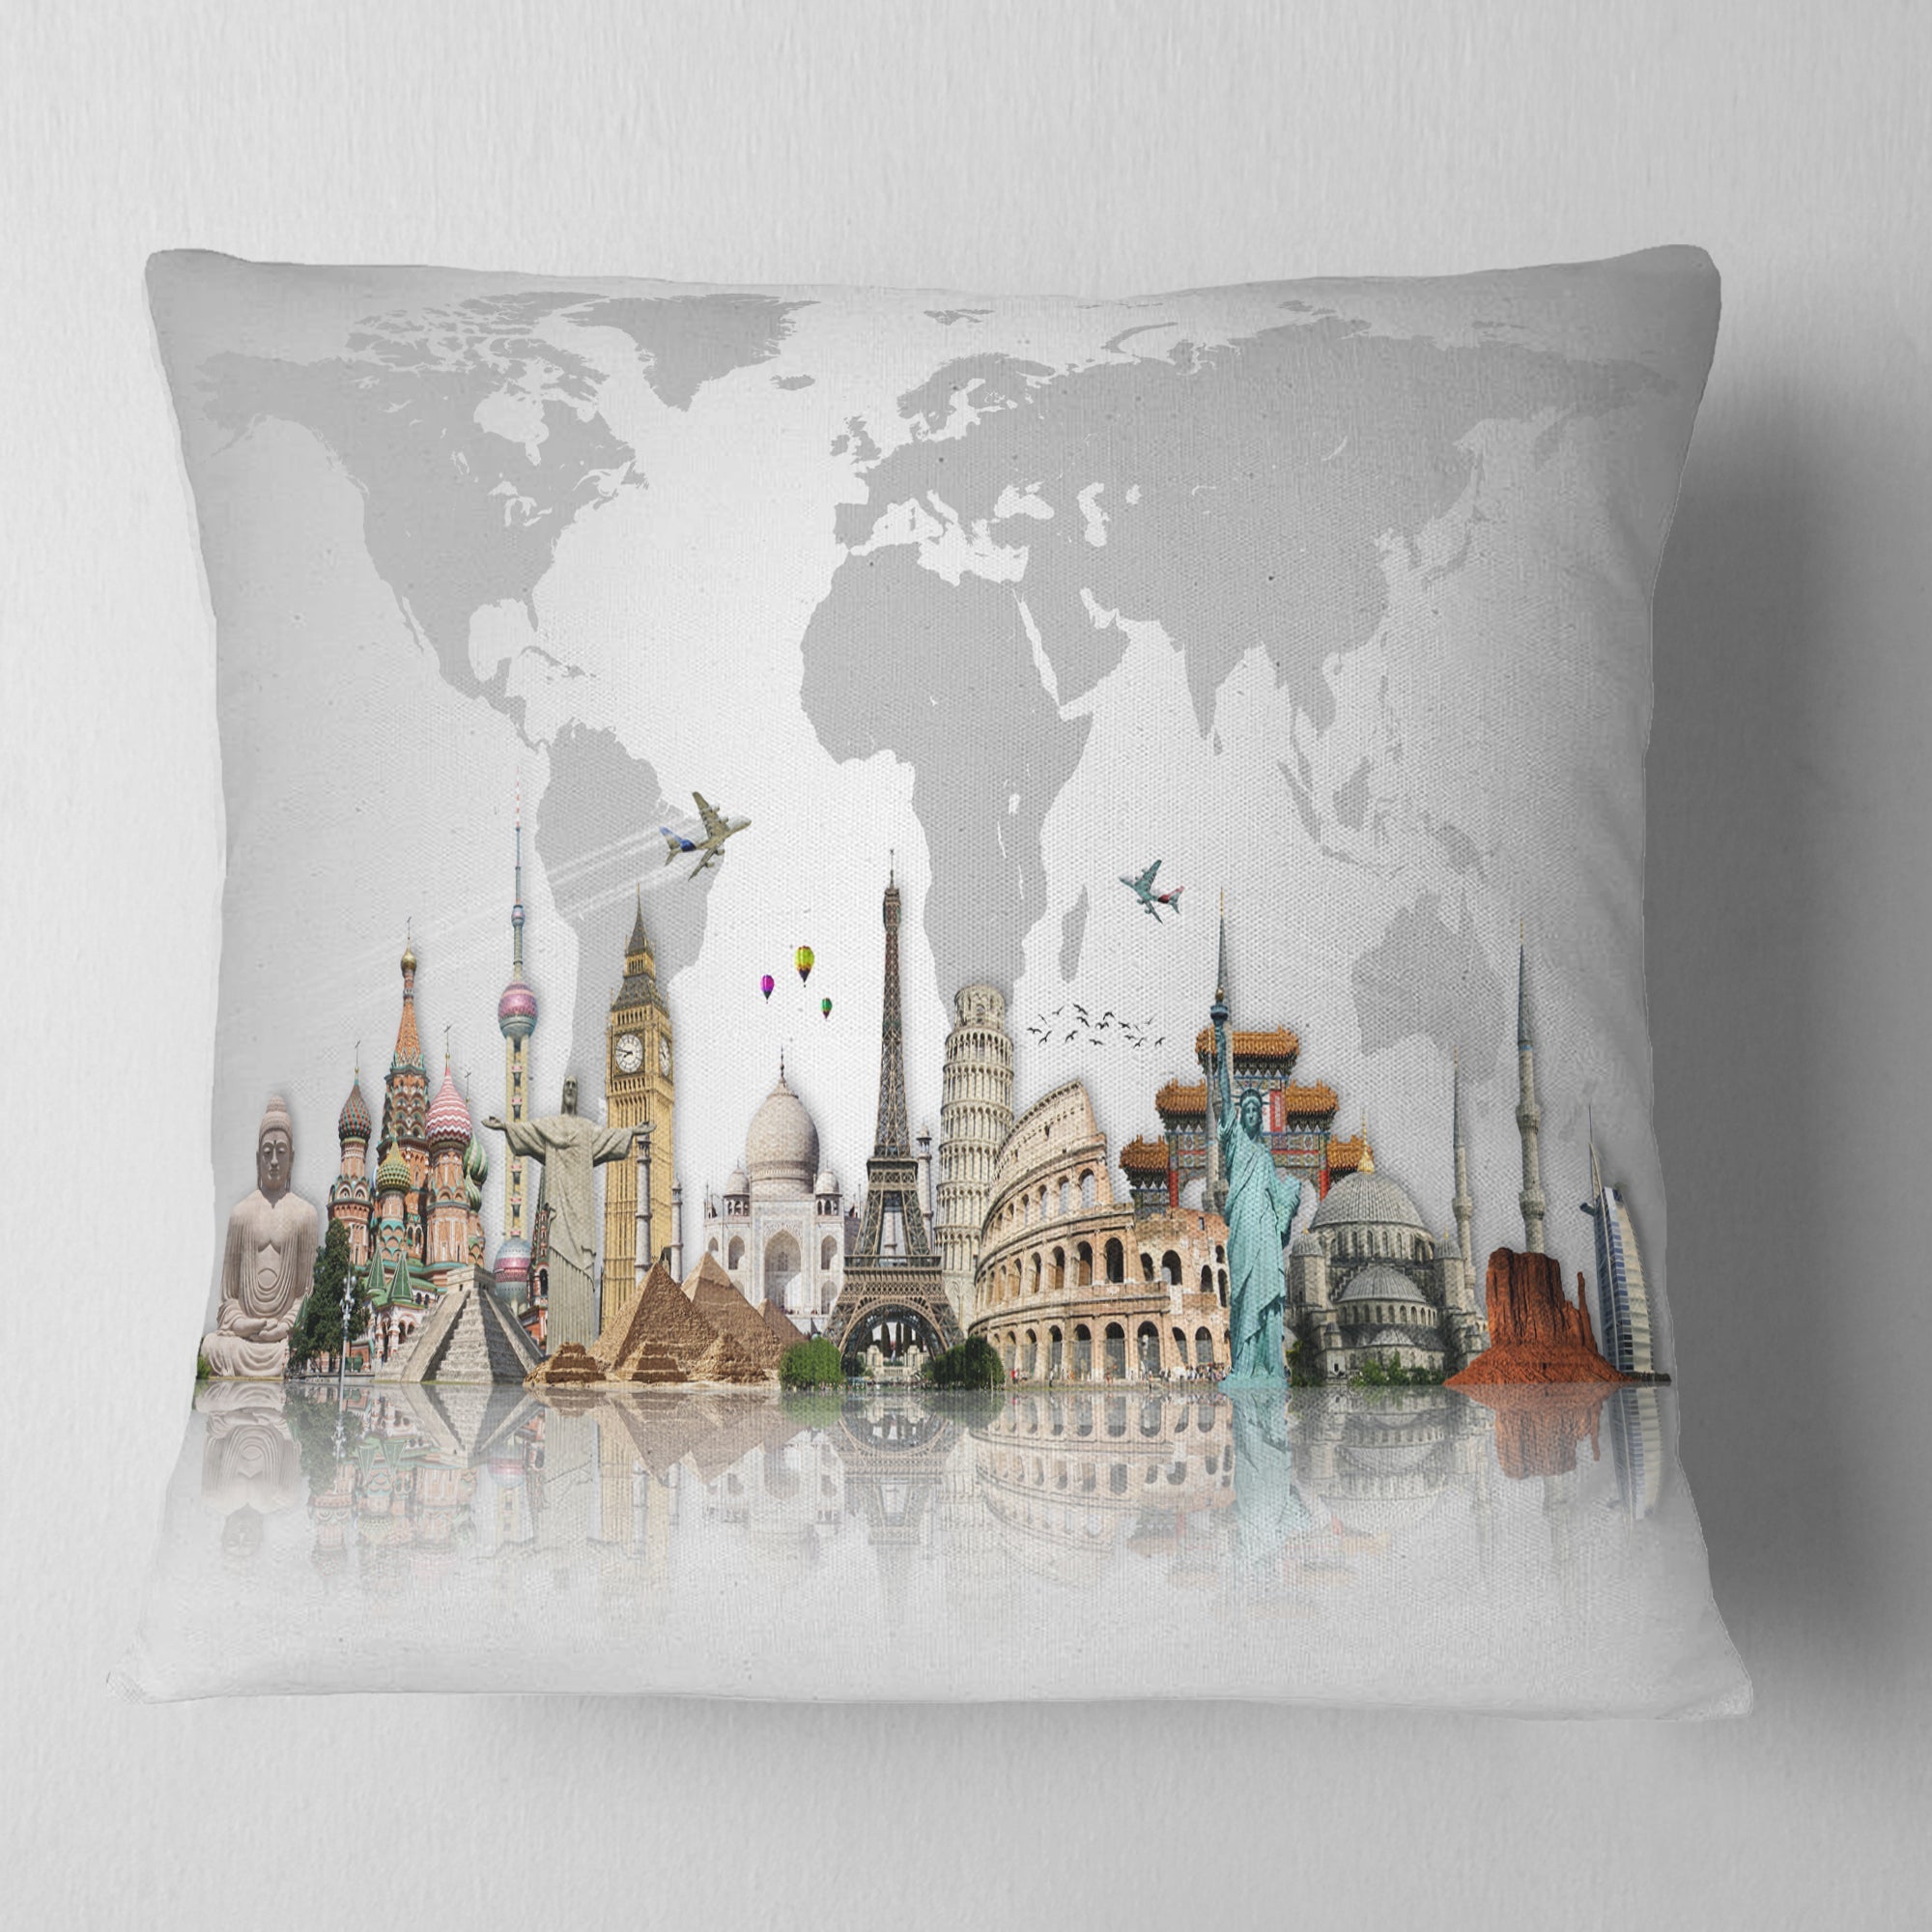 Famous Monuments Across World - Throw Pillow